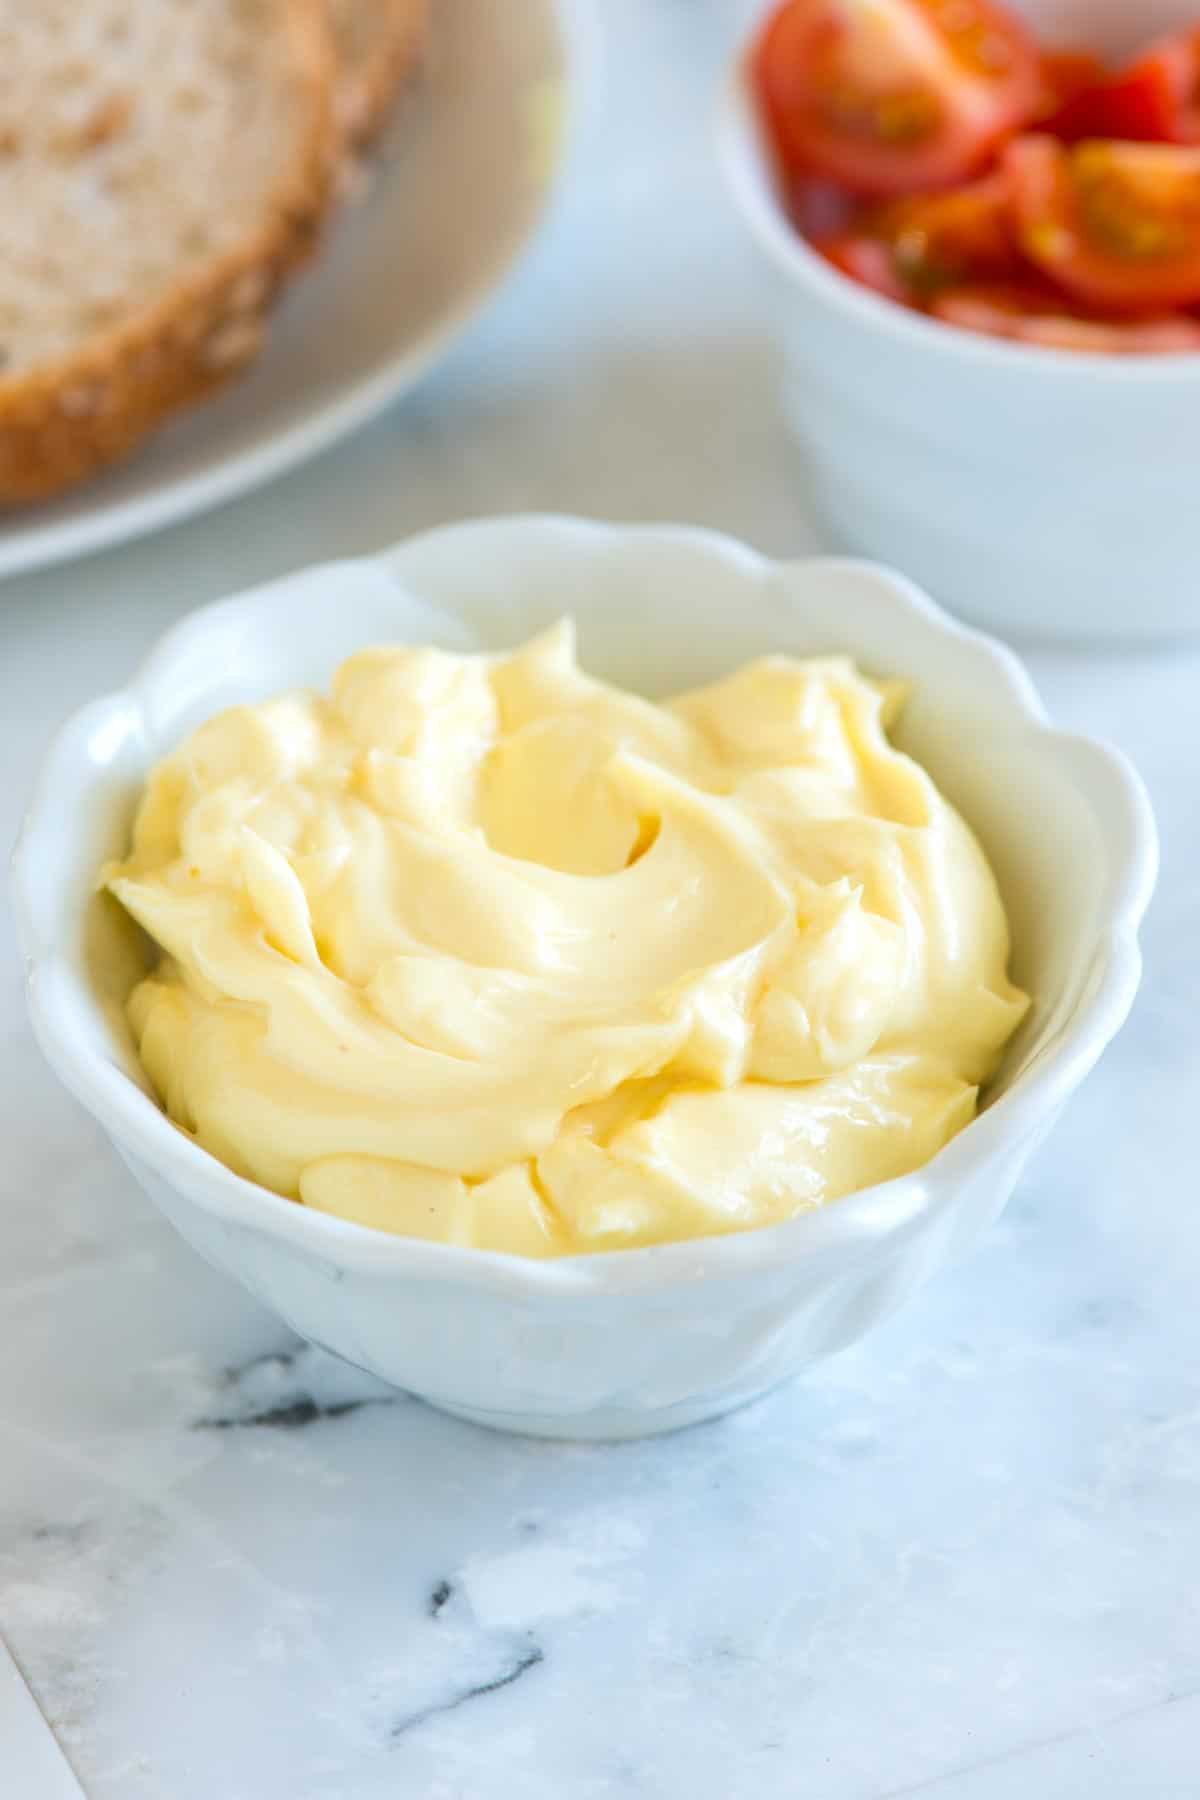 How long can mayonnaise be left out?